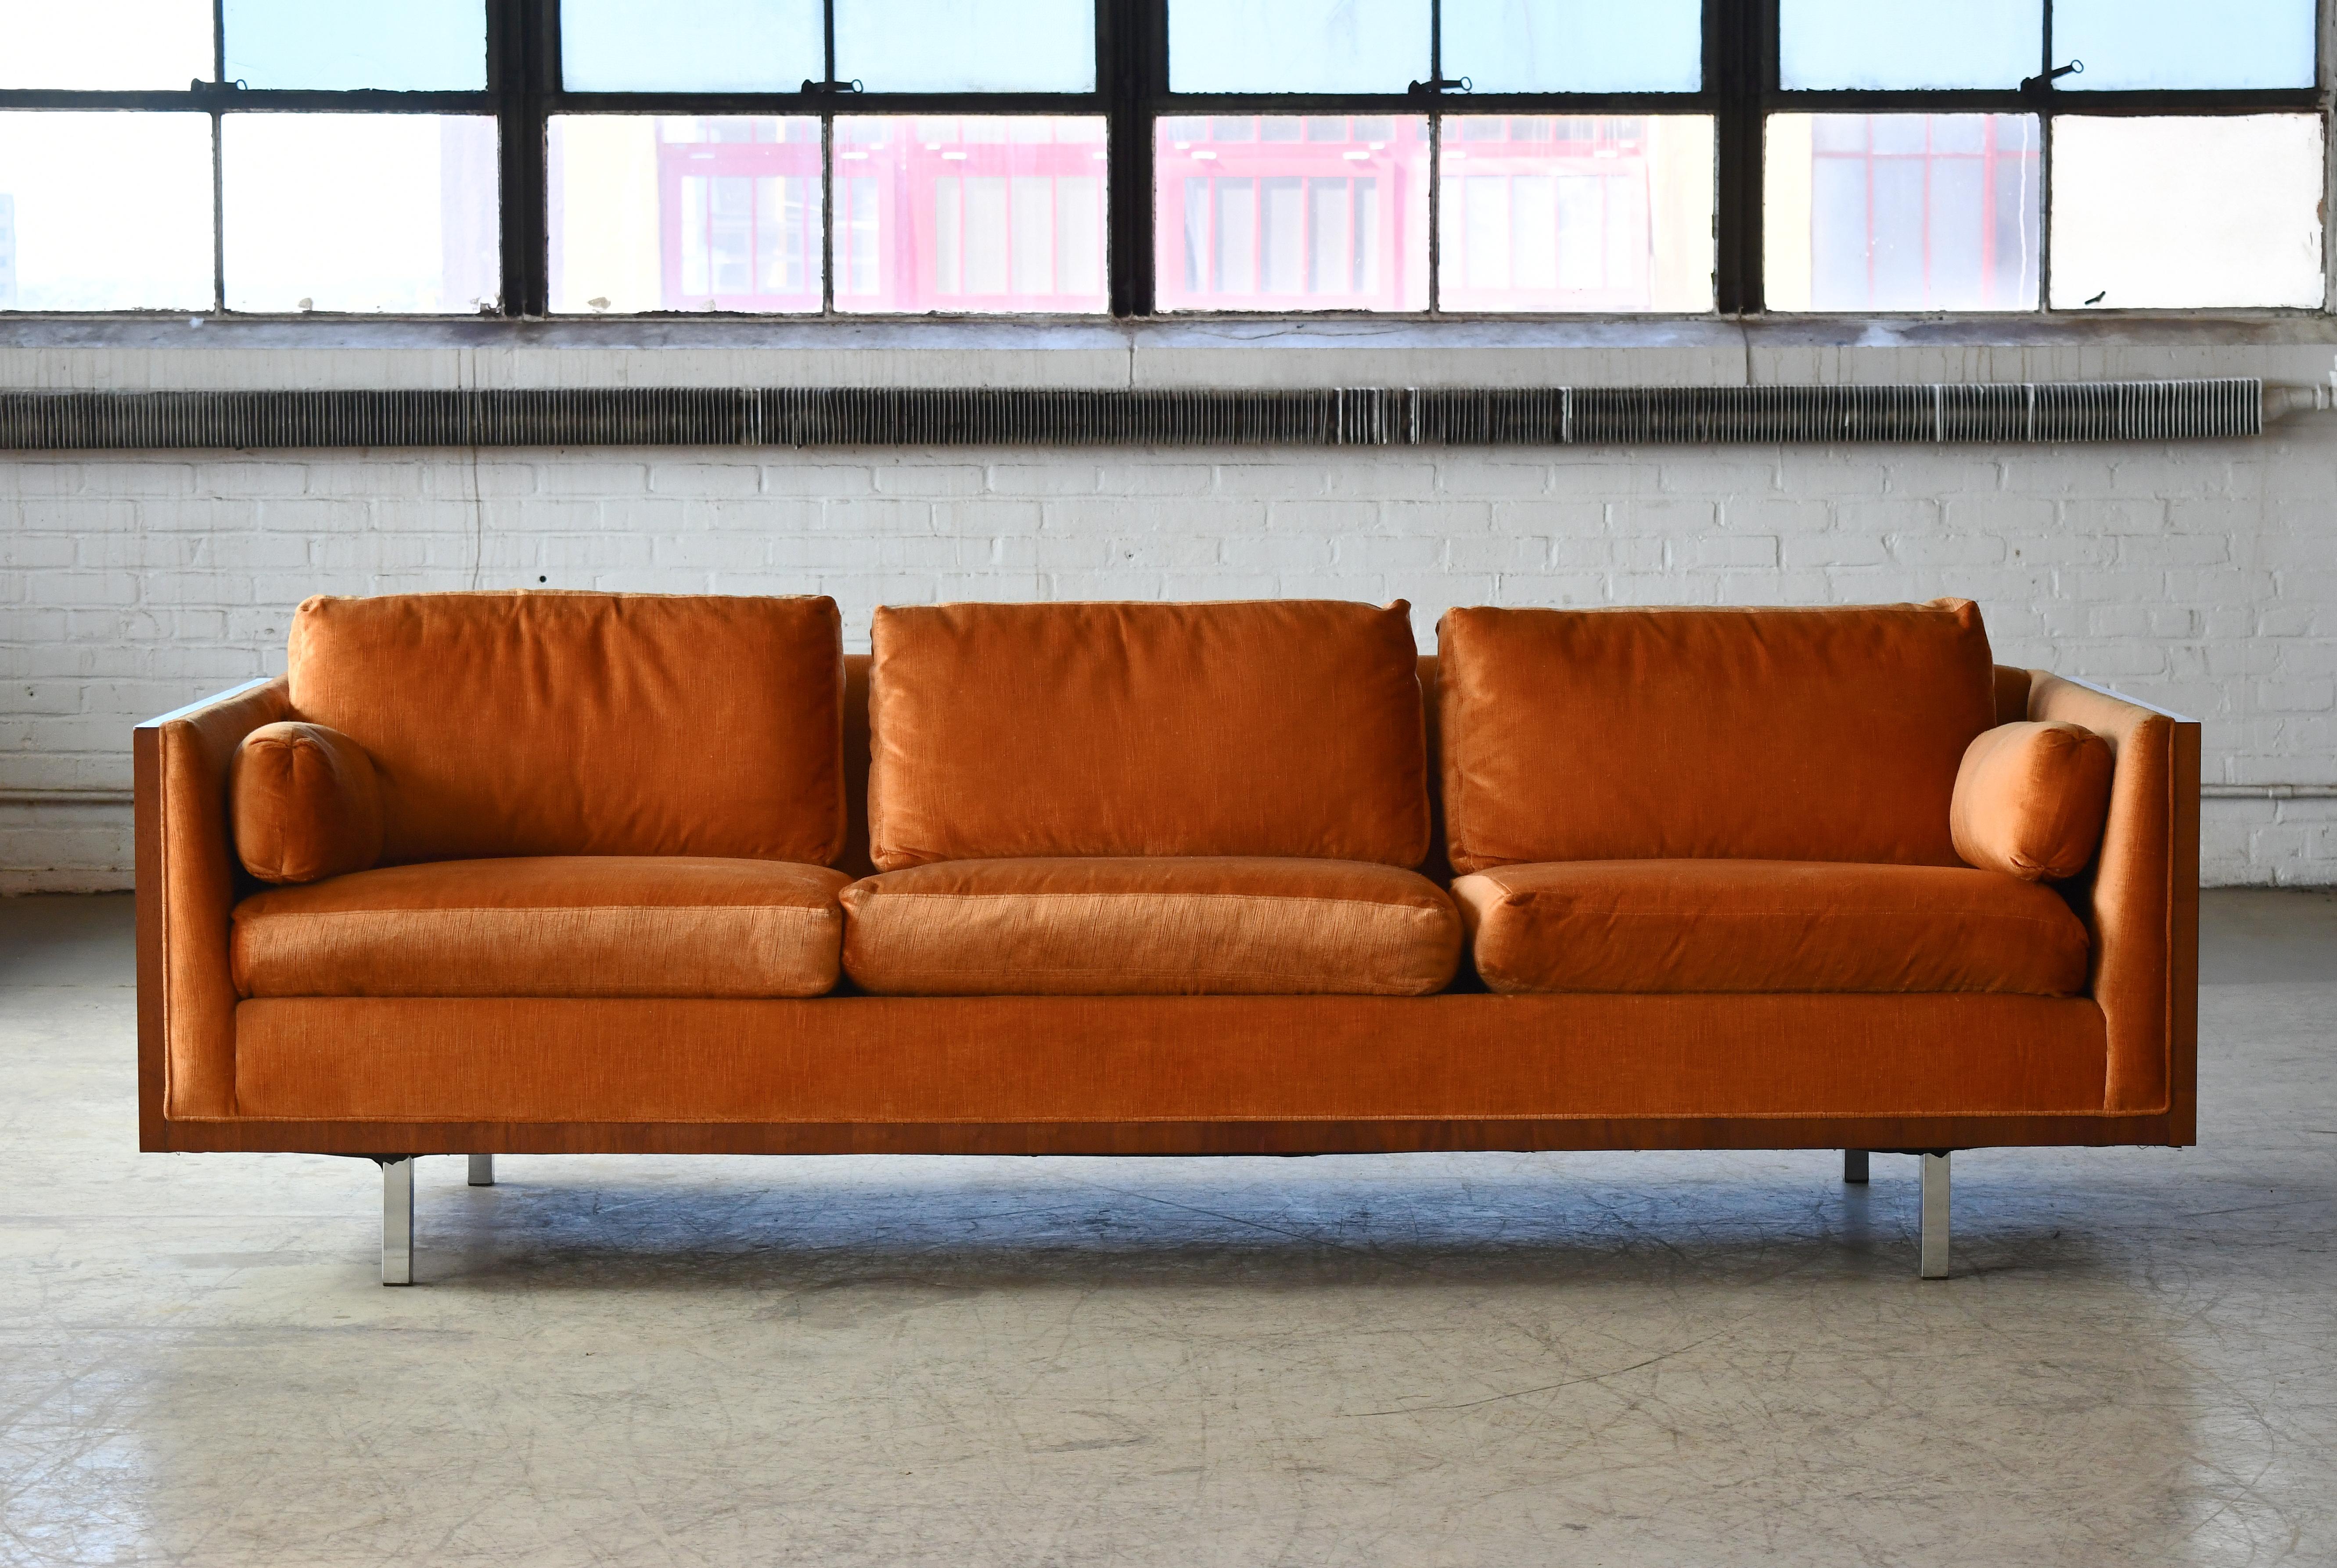 Gorgeous case sofa with figural walnut sides and square chrome legs attributed to Milo Baughman for Thayer-Coggin. The sofa was bought from New York based retailer, Maurice Villency in the late 1970's and carries a label from here. 
Amazing deep